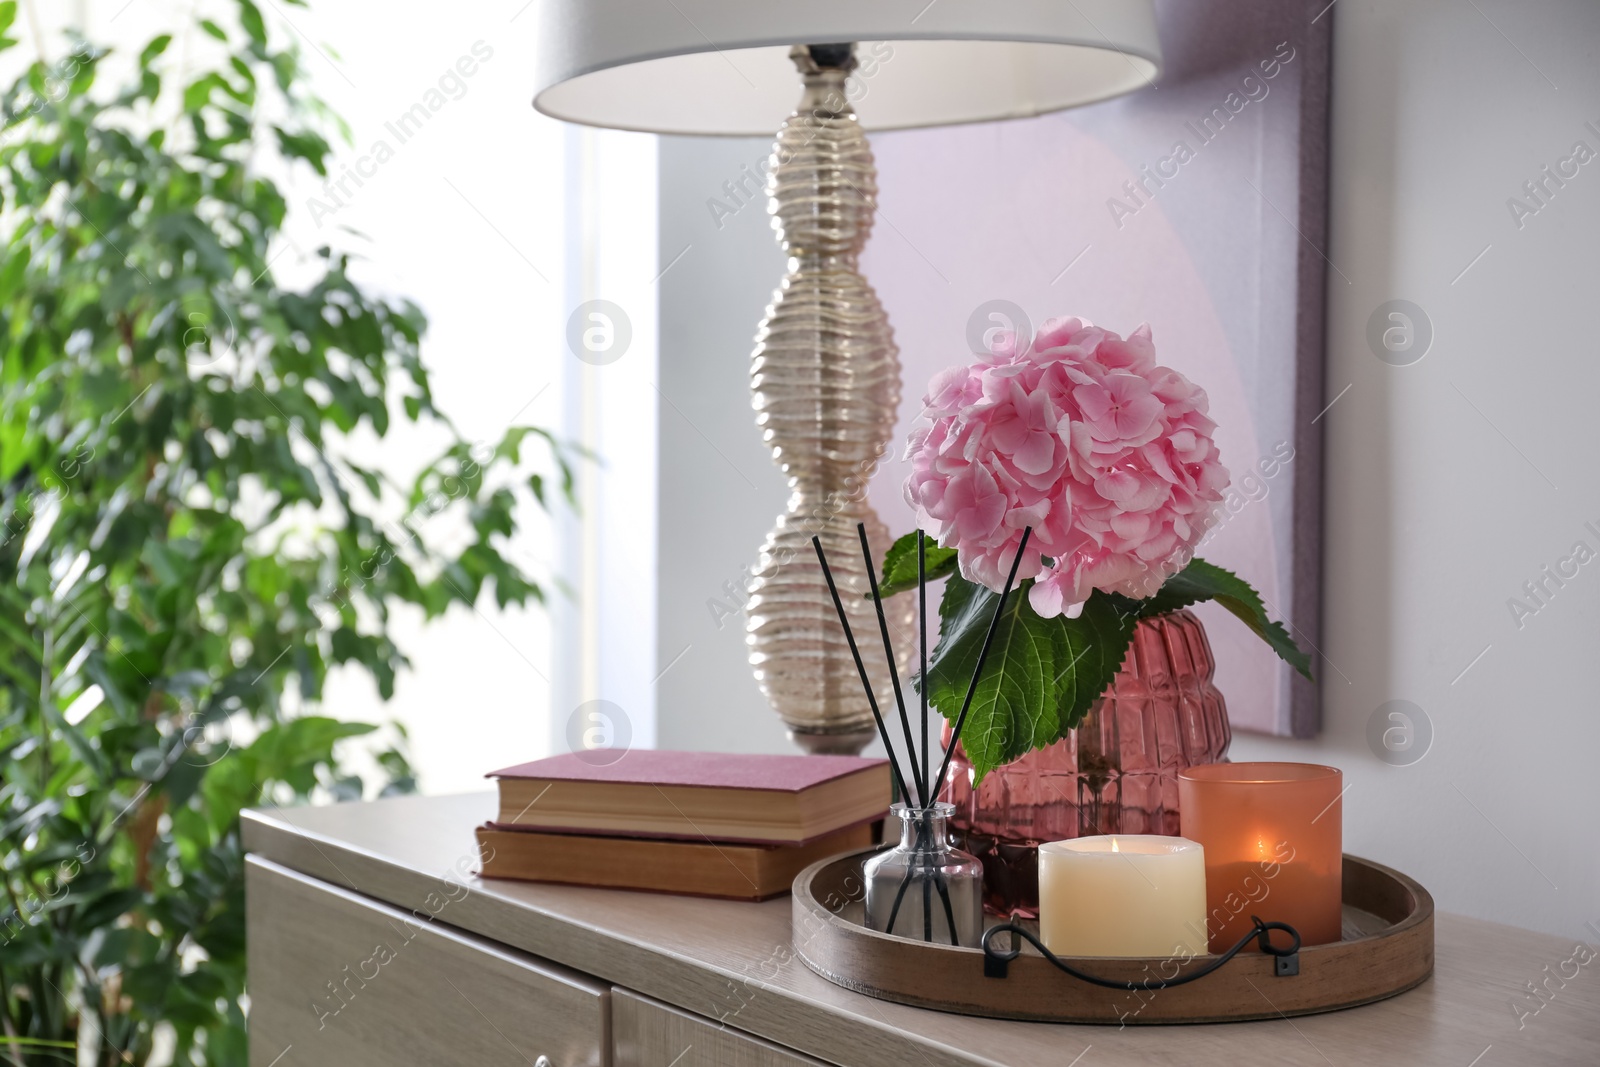 Photo of Stylish tray with different interior elements and lamp on chestdrawers indoors